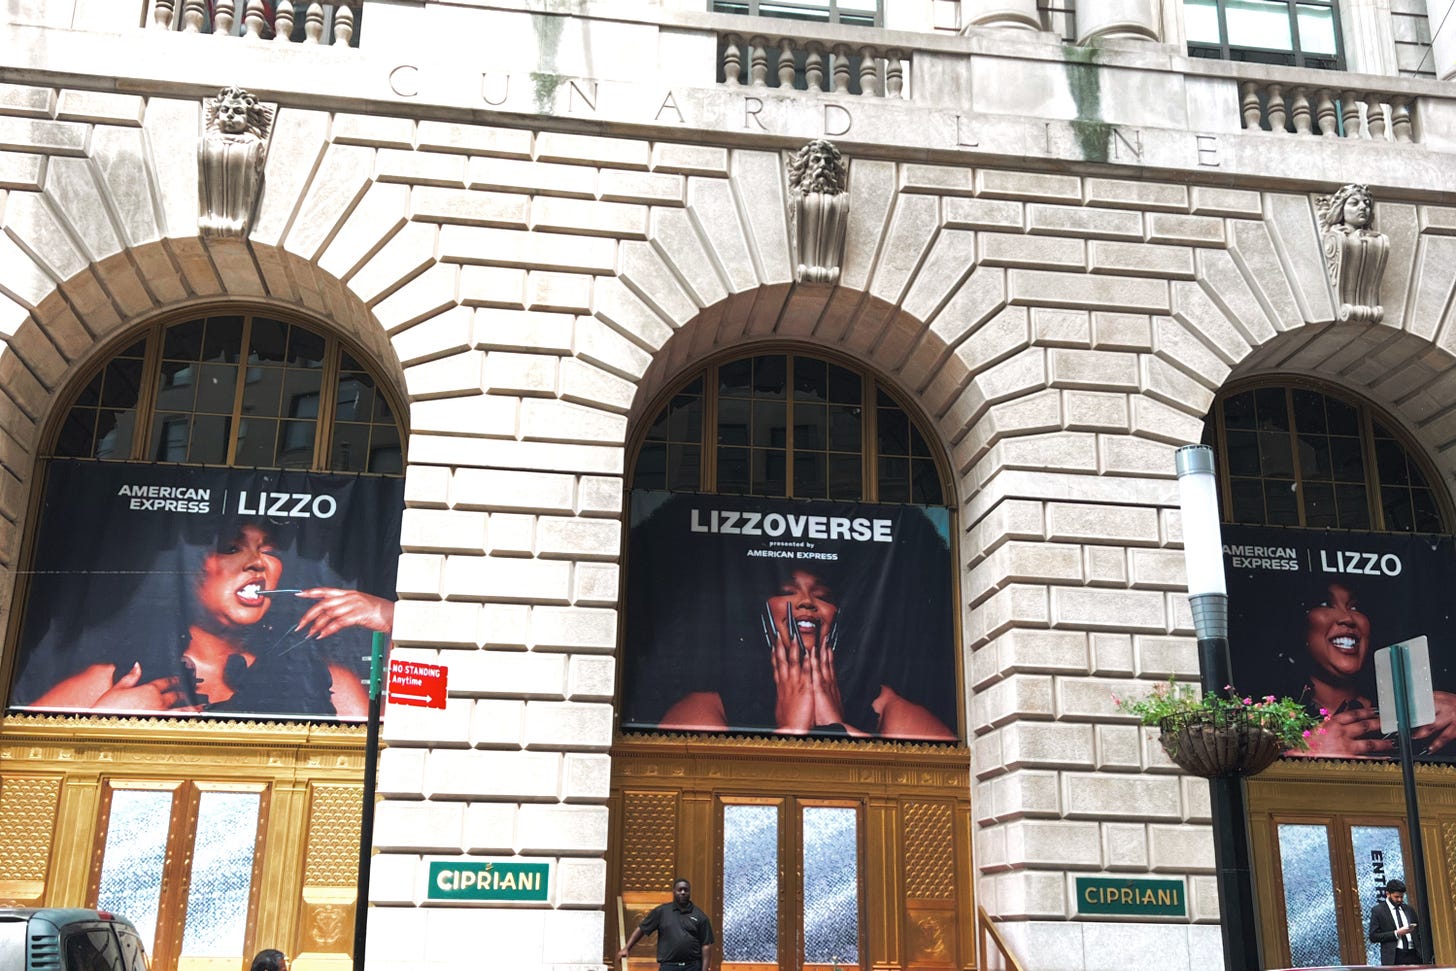 A photo of Cipriani 25, a white stone building with three archways and three posters of Lizzo hung in each one.  Below each poster is a gold art-deco style doorway with speckled, frosted glass panes in the door.